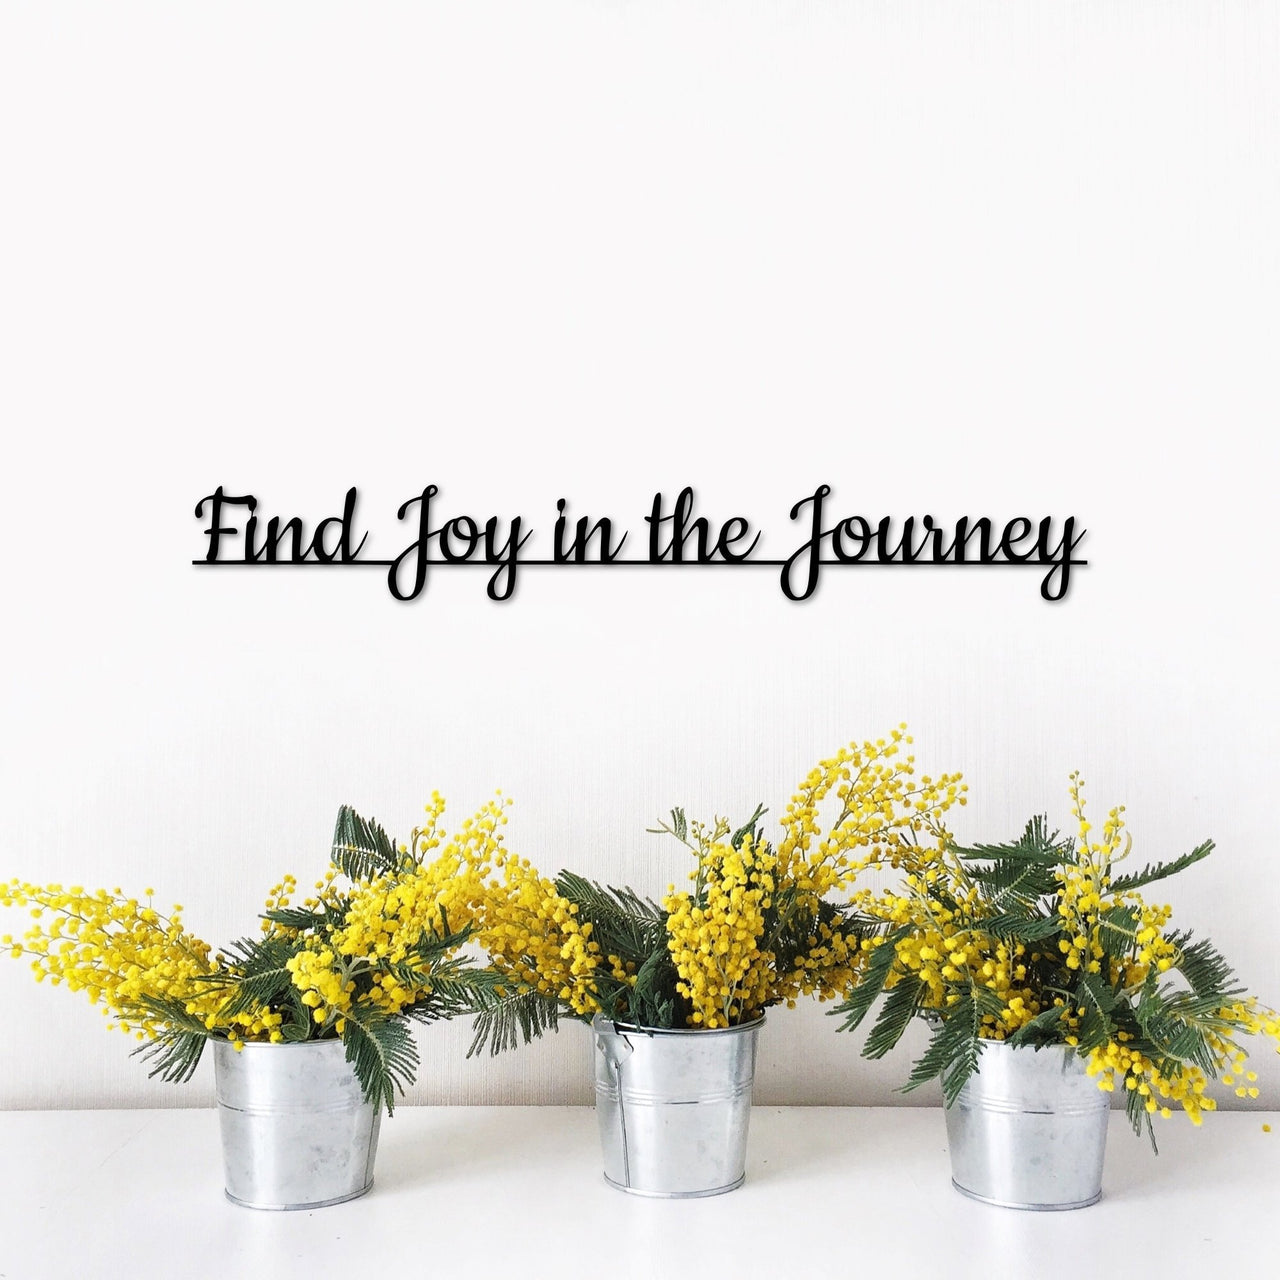 Find Joy in the Journey Sign | Living Room Signs | Metal Script Words for the Wall | Positive Wall Quotes | Motivational, Religious Saying